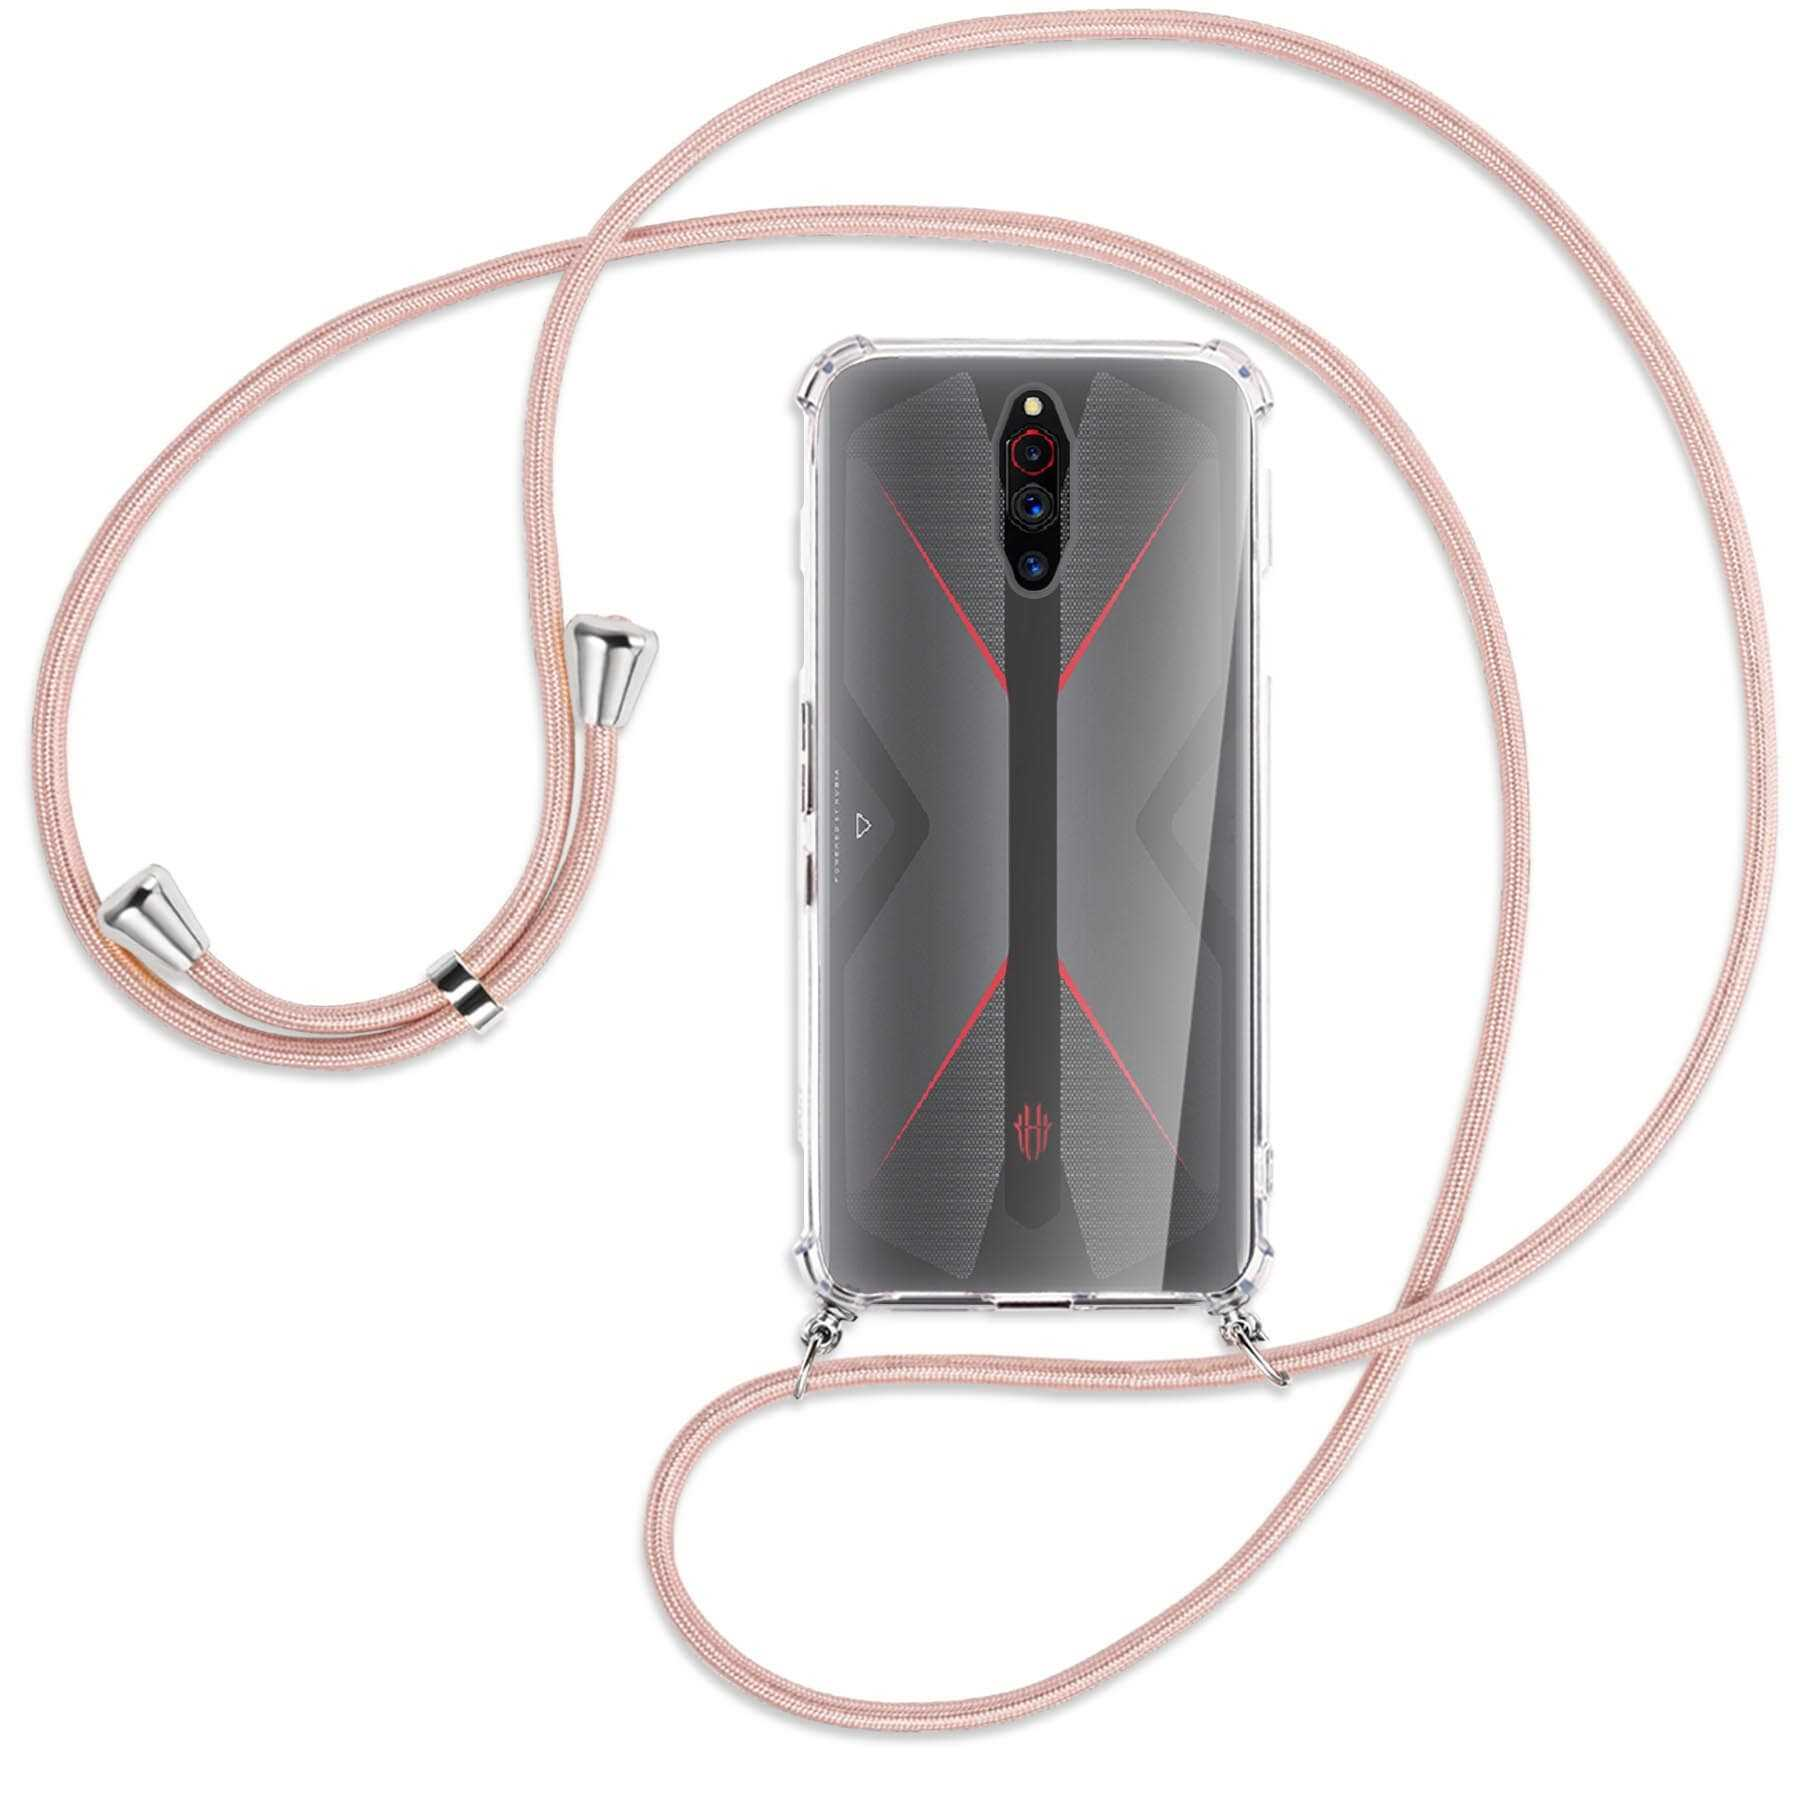 Red Nubia Red ENERGY ZTE, Silber 5S, Magic Rosegold mit MORE MTB Nubia Magic / Kordel, Umhänge-Hülle Backcover, 5G,